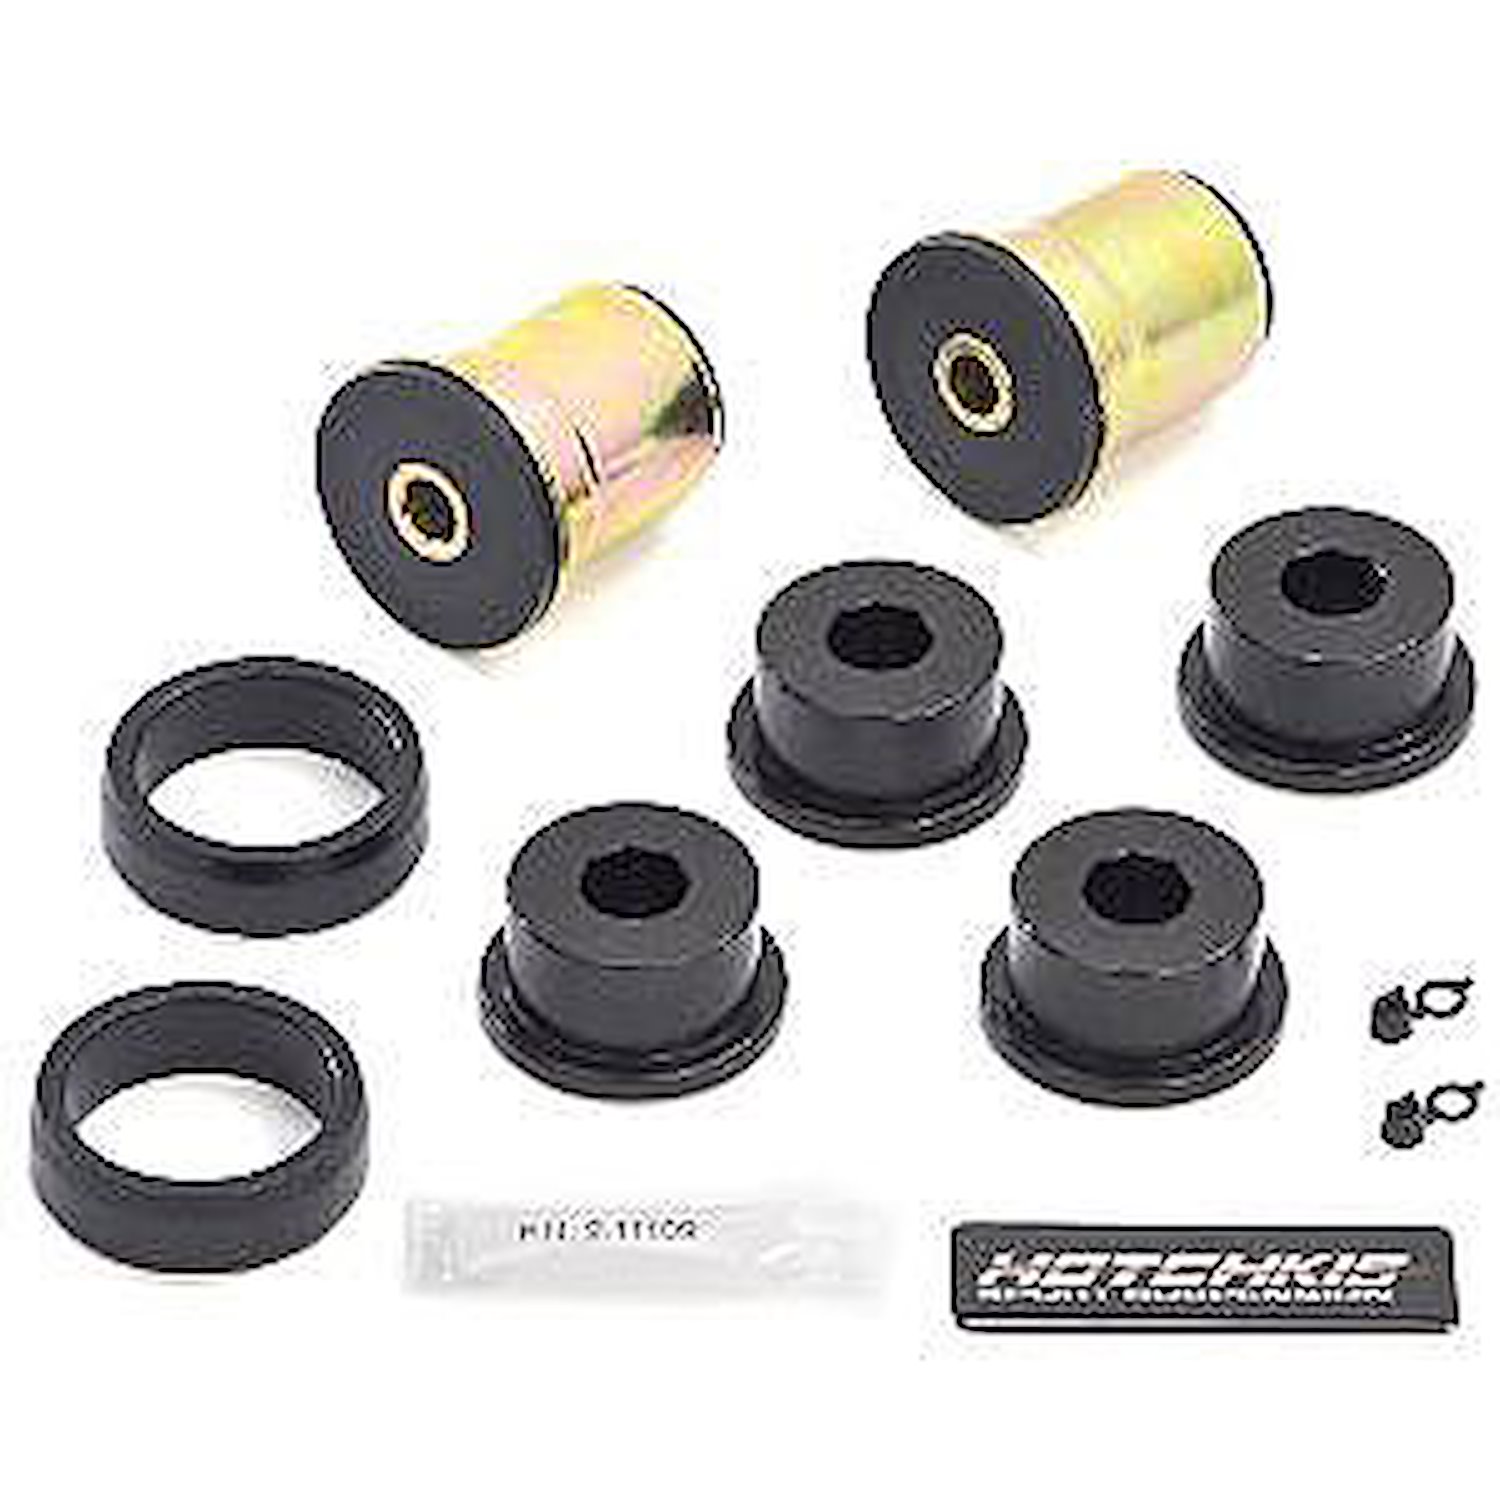 Trailing Arm Bushing Kit For Use With 515-1304,